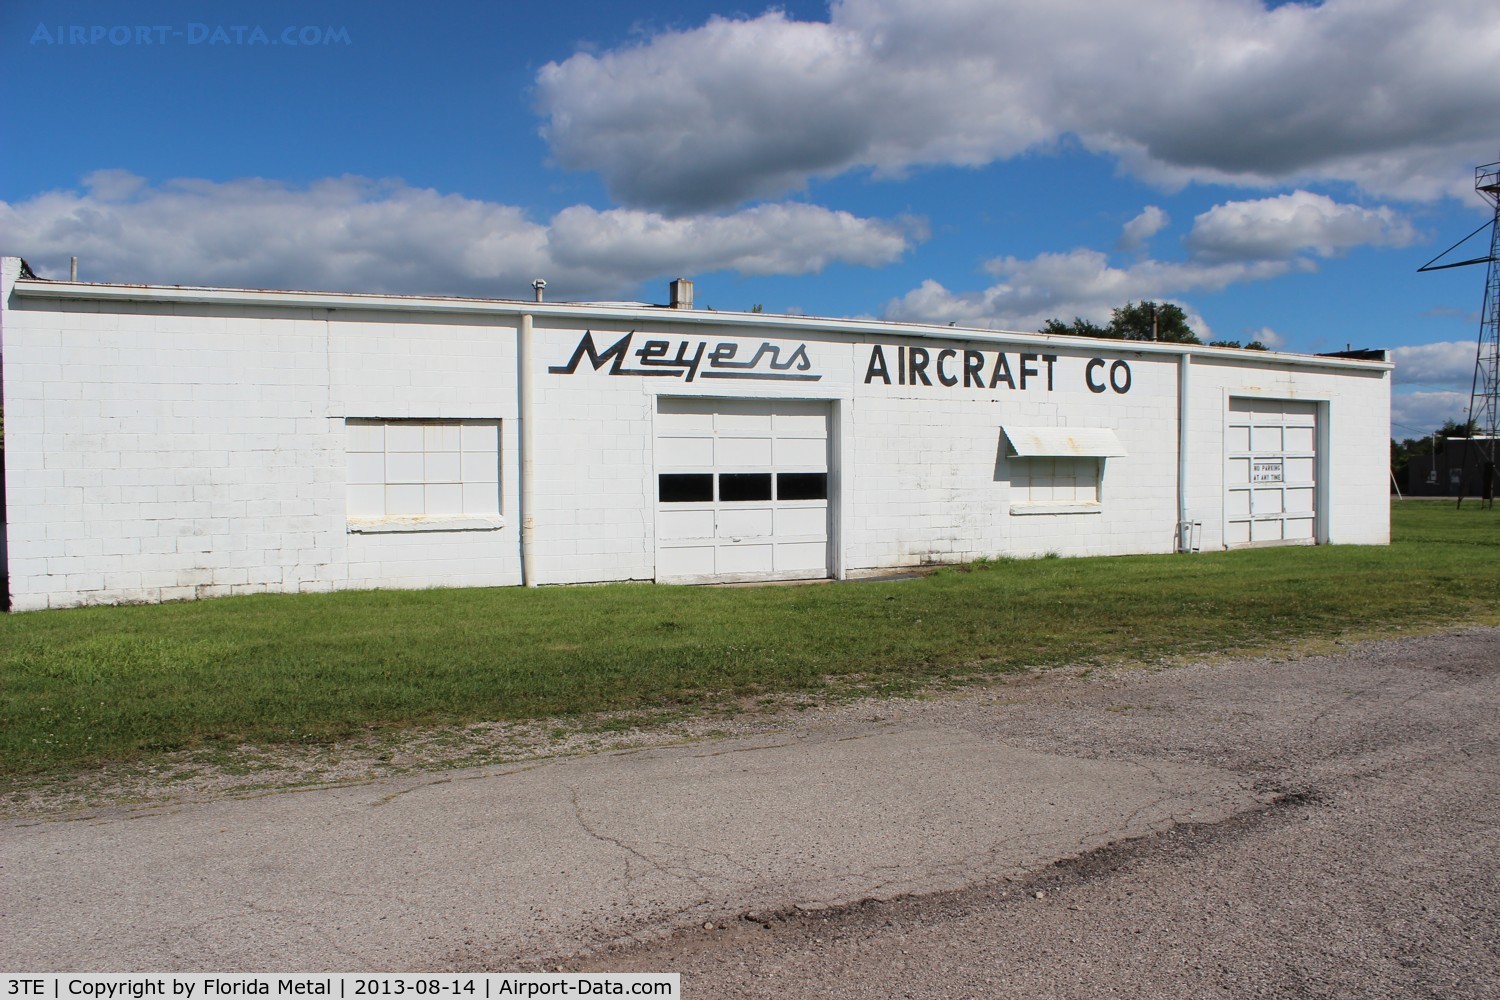 Meyers-diver's Airport (3TE) - Old Meyers Aircraft building